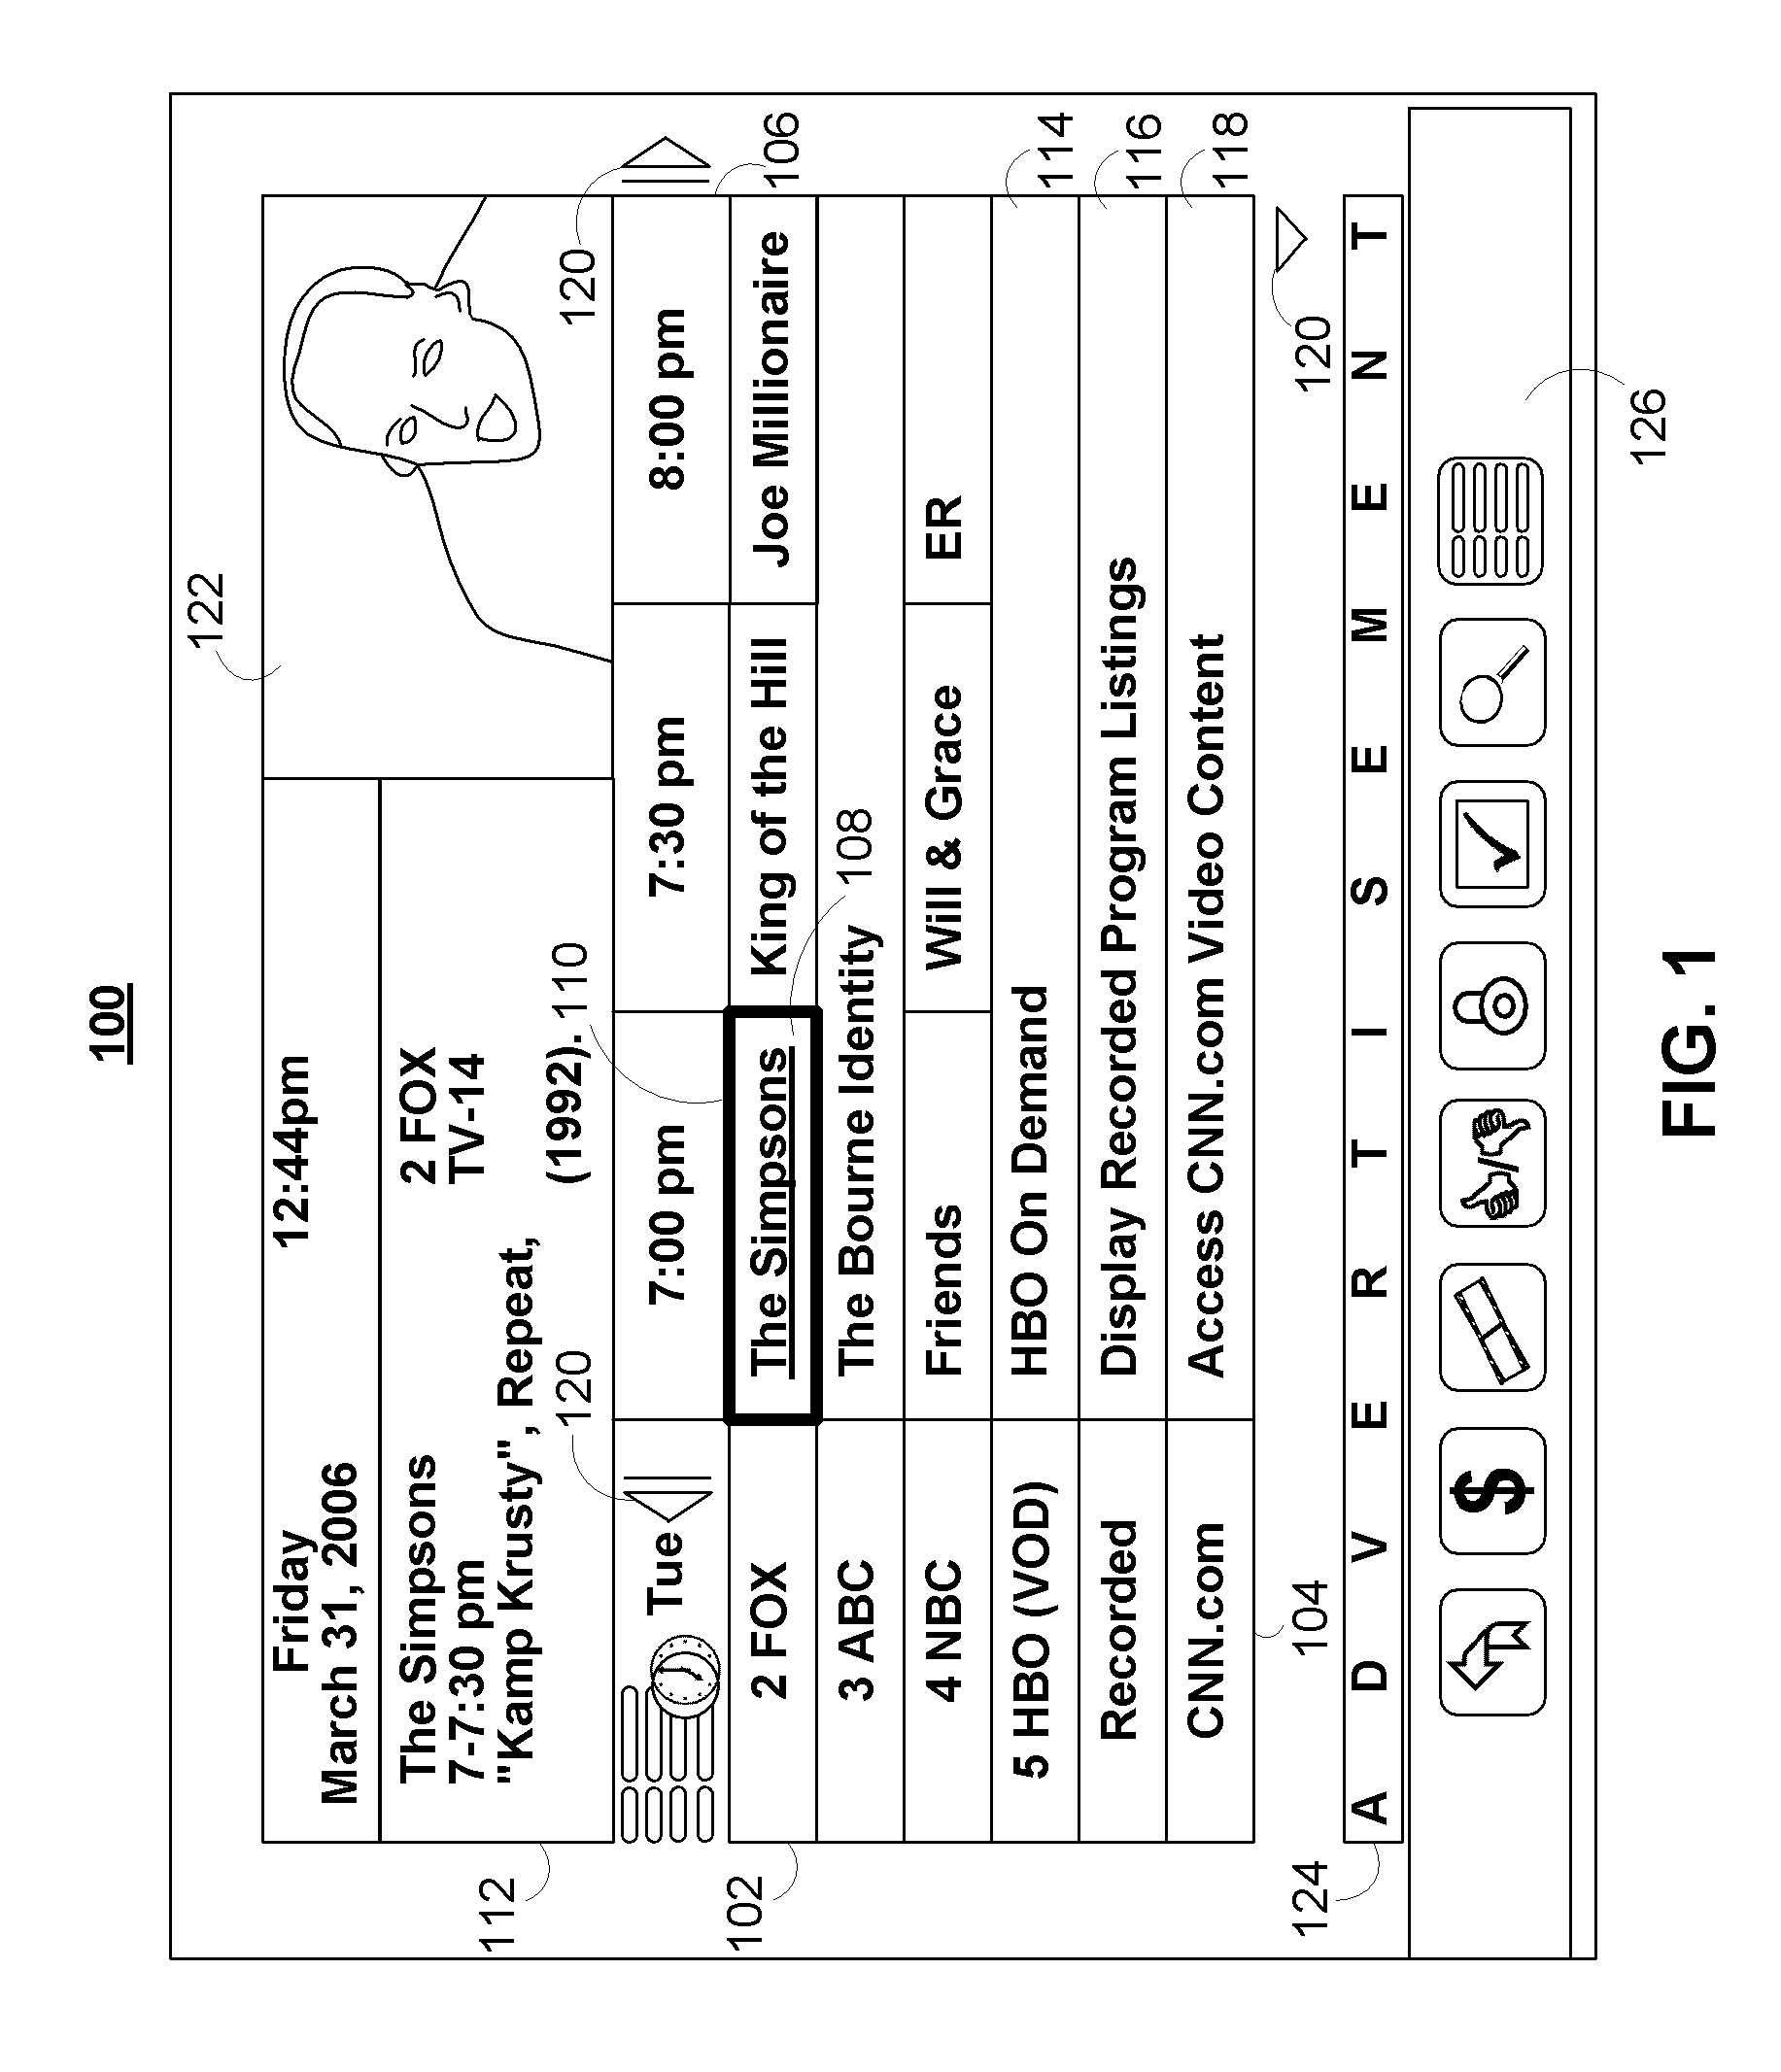 Systems and methods for multiple media guidance application navigation